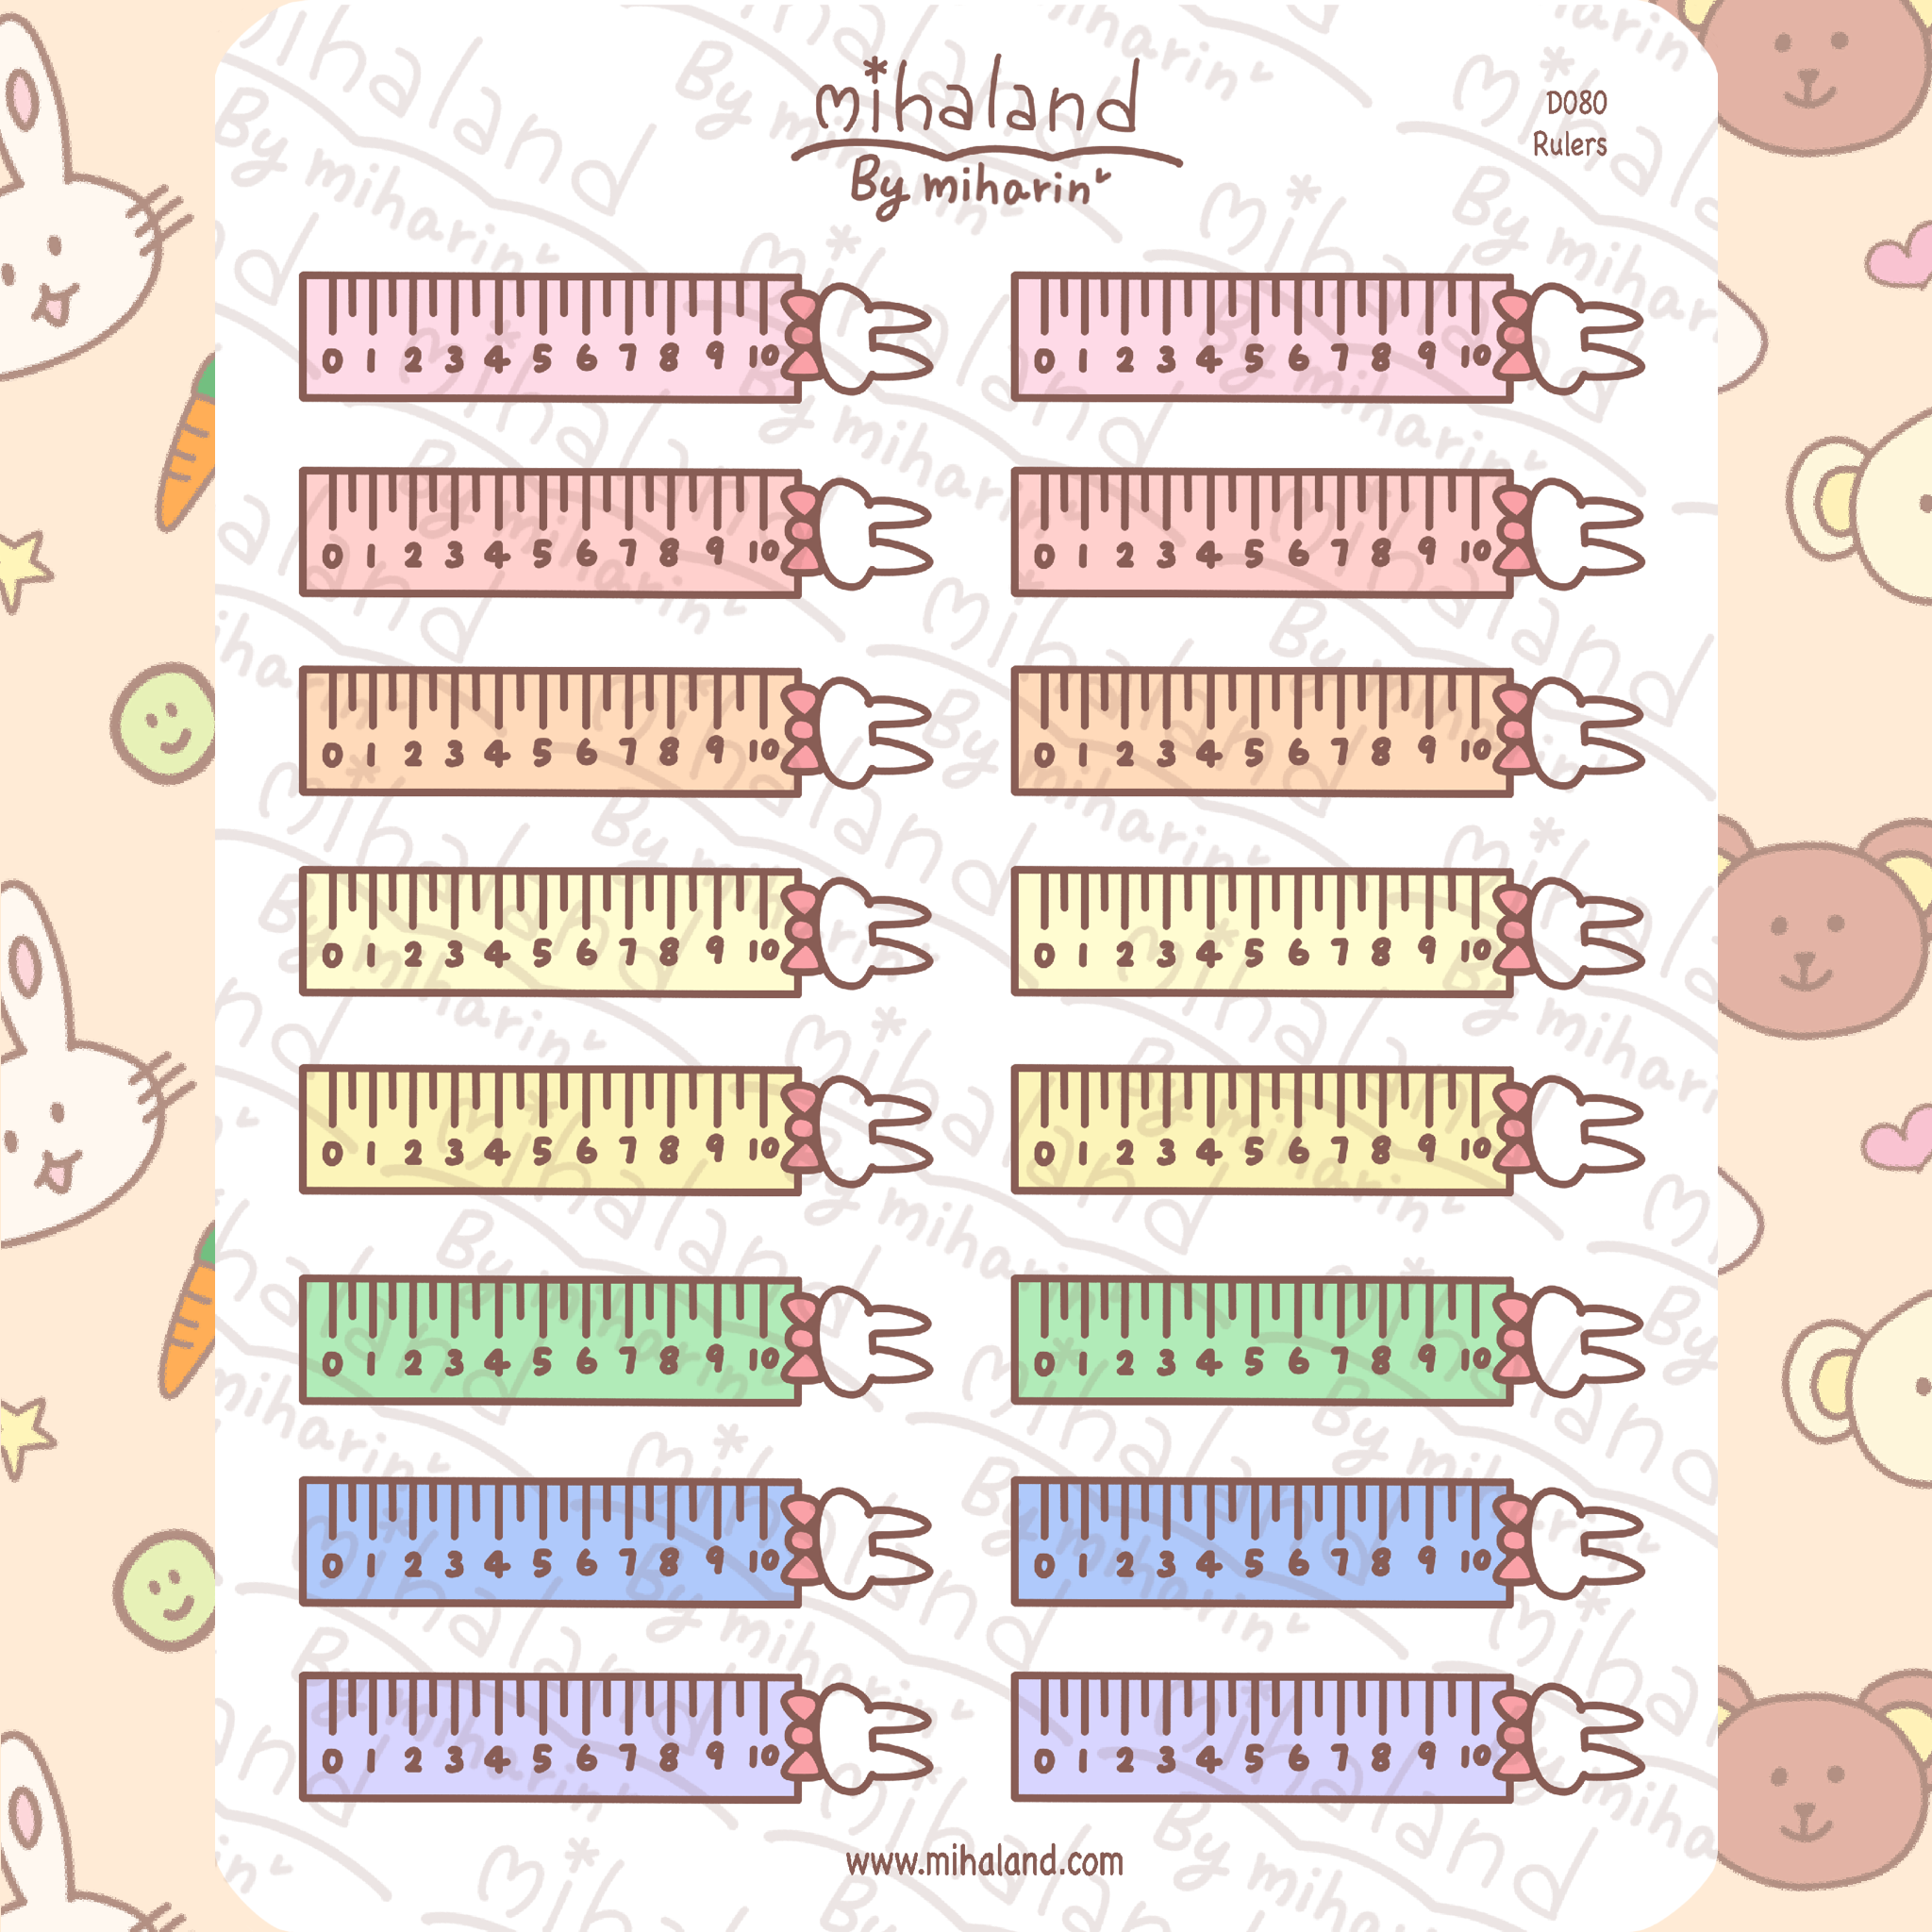 Rulers Planner Stickers (D080) - mihaland